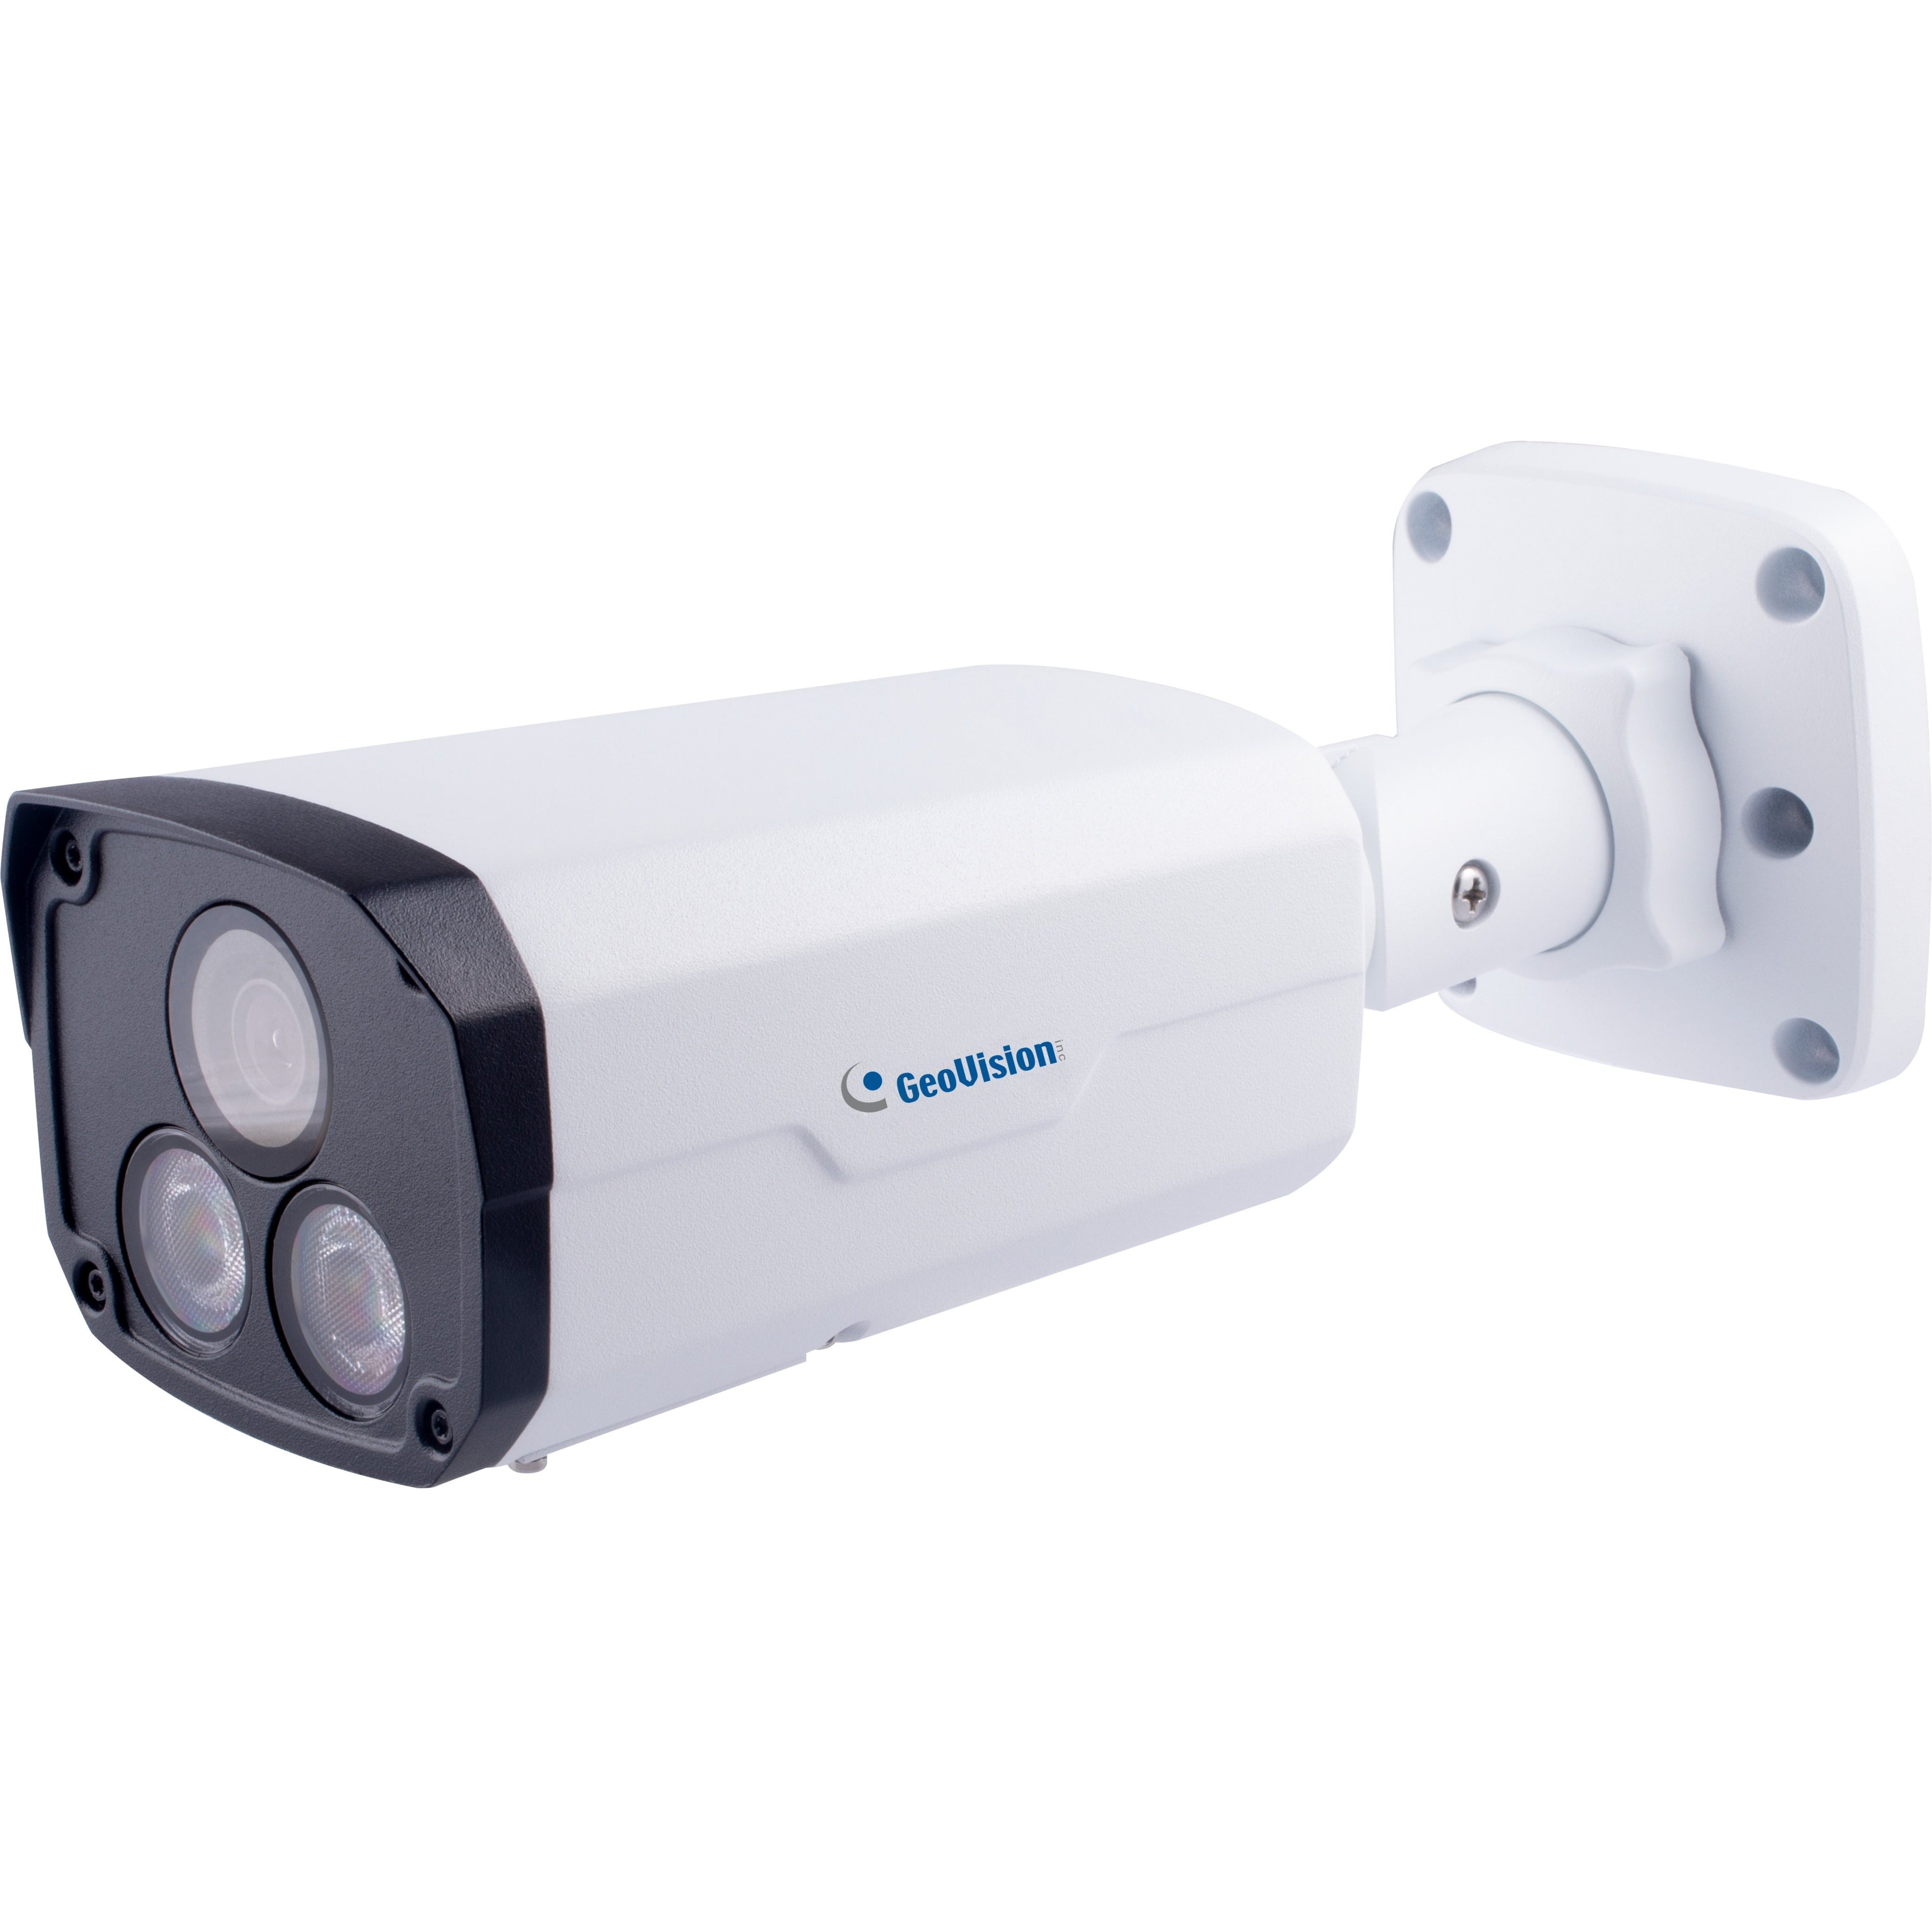 GeoVision GV-BLFC5800 5MP Full Color Bullet IP Camera, Low Lux, WDR, Outdoor